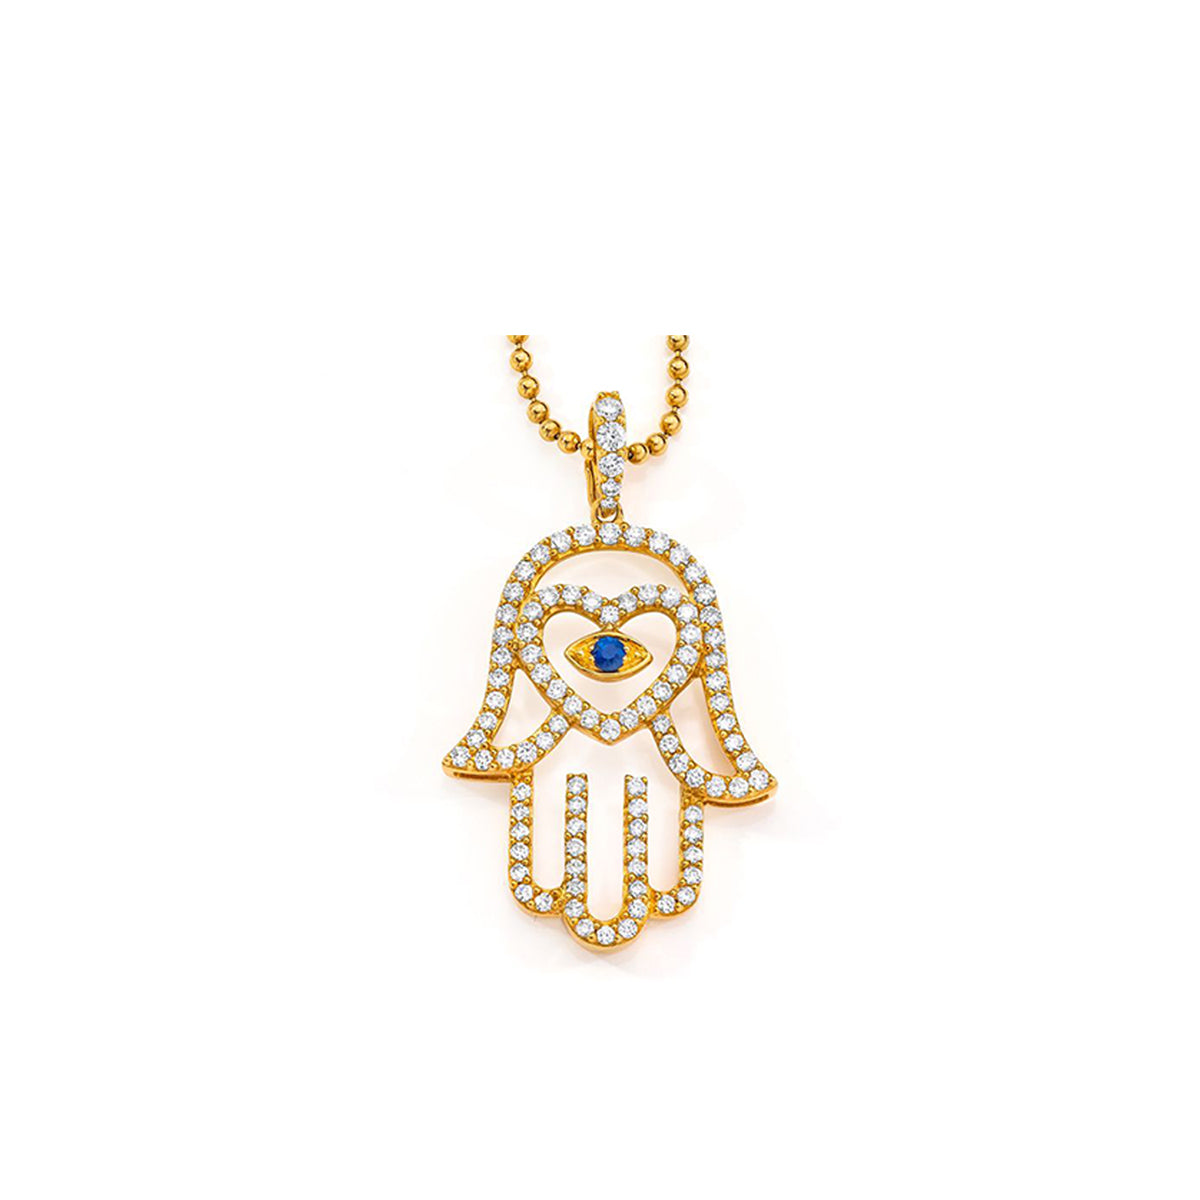 18K Large Open Hand Hamsa Charm with Heart on Necklace - Charm & Necklace sold separately